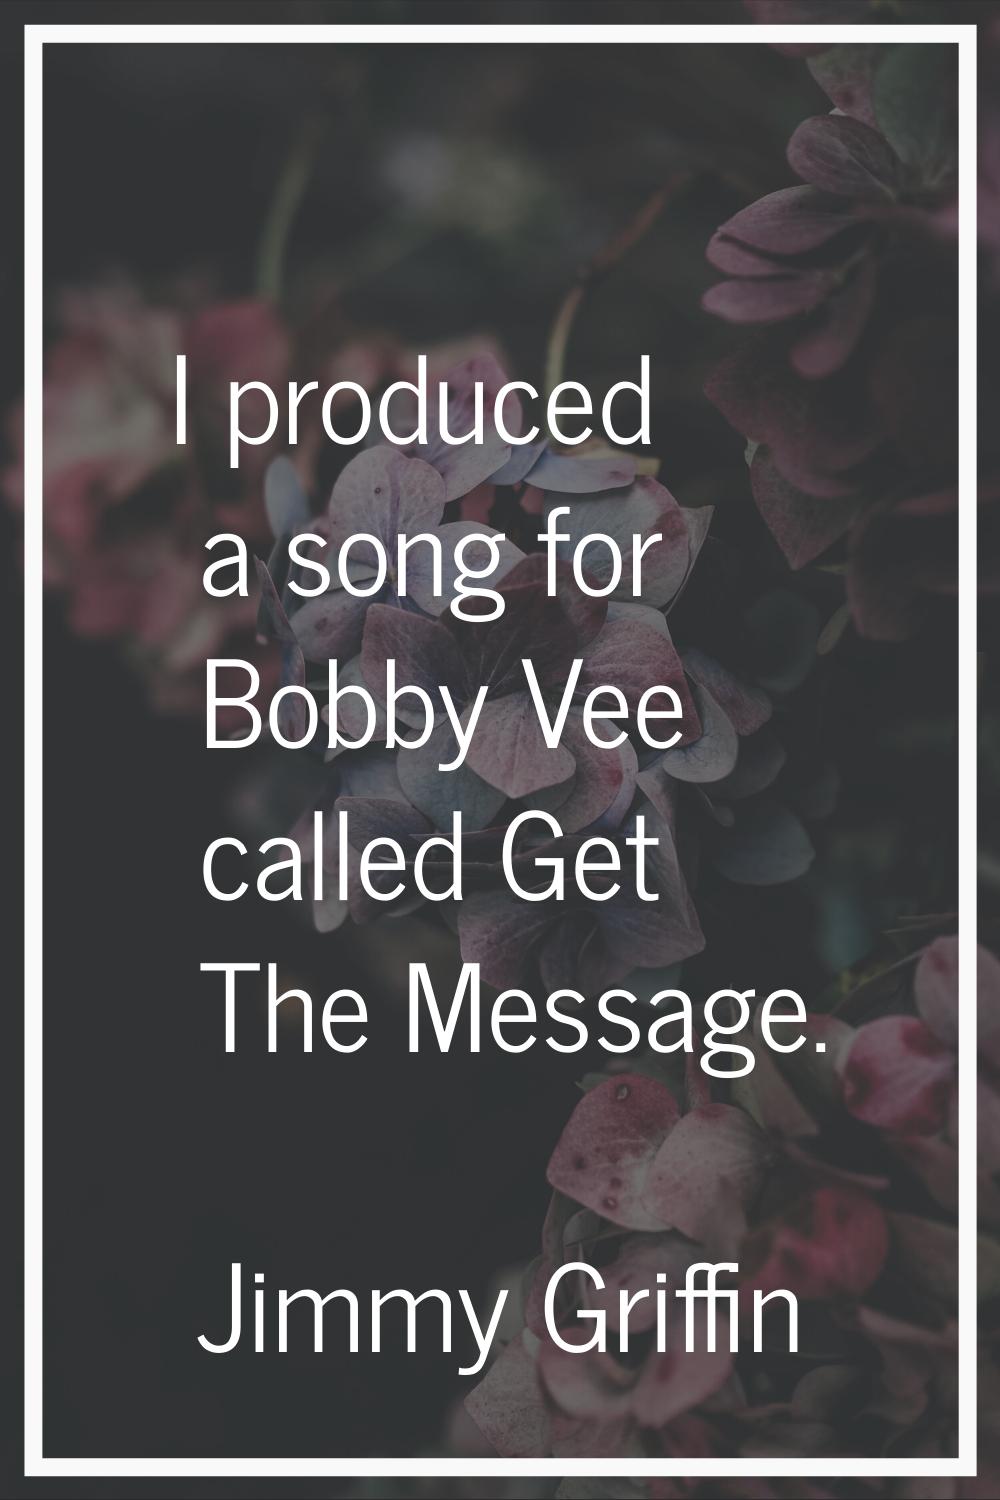 I produced a song for Bobby Vee called Get The Message.